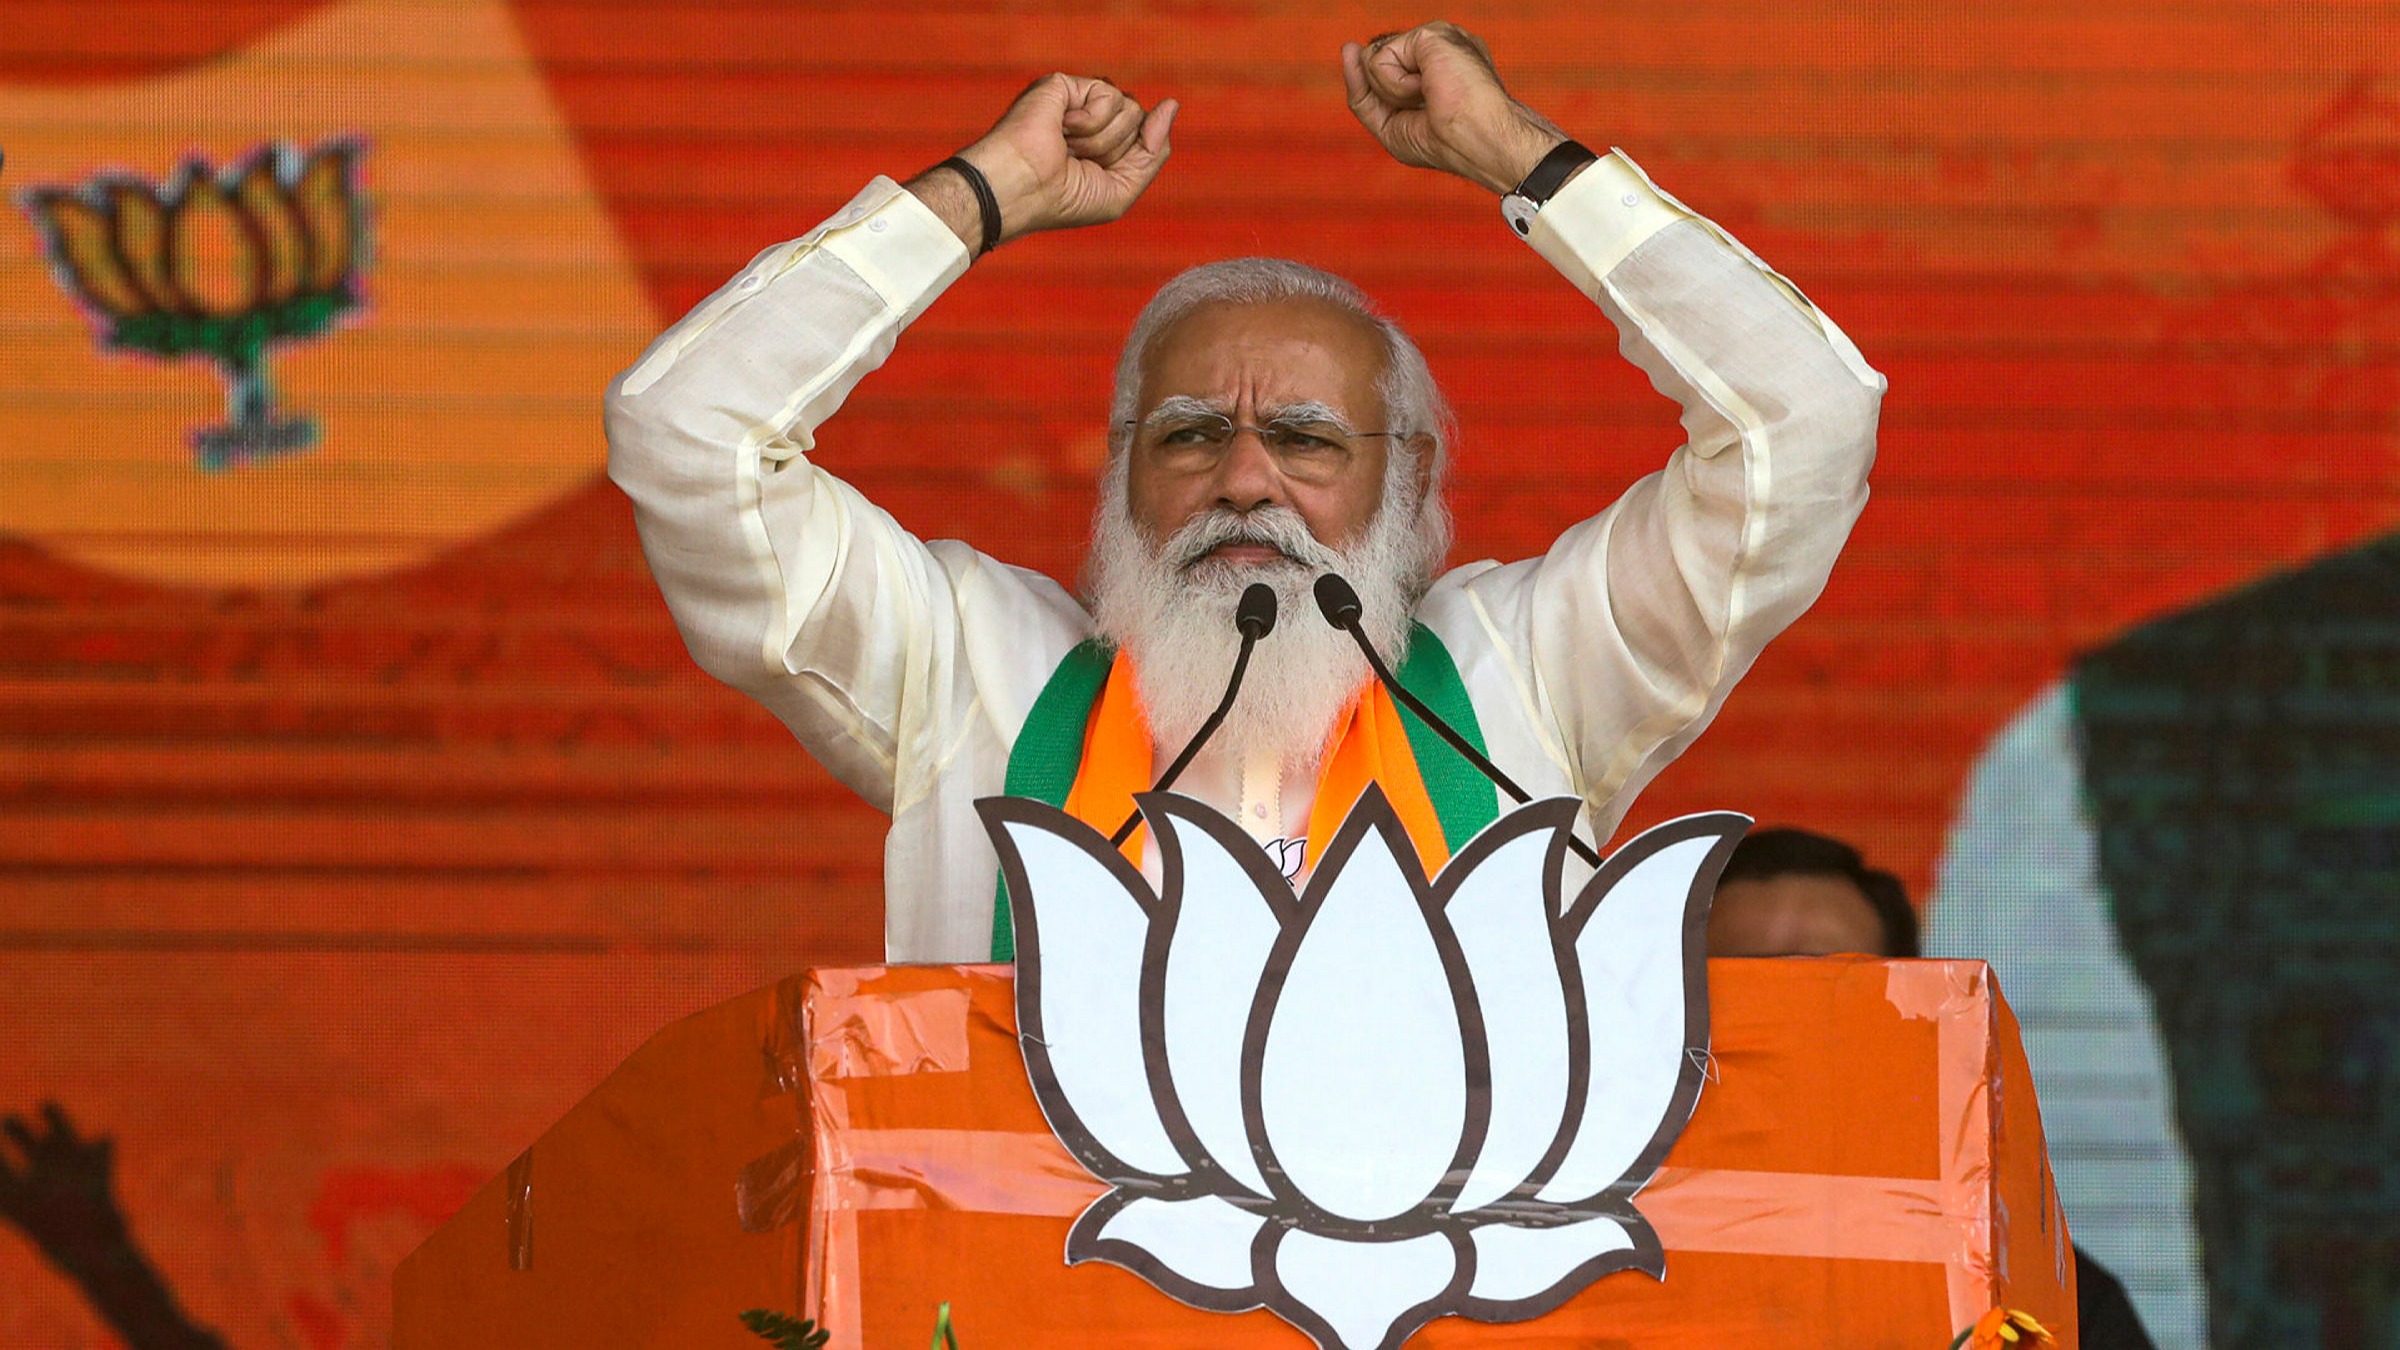 Modi Thanked Voters, Stamp of Approval for BJP’s “Pro-Poor Pro-Active Governance”